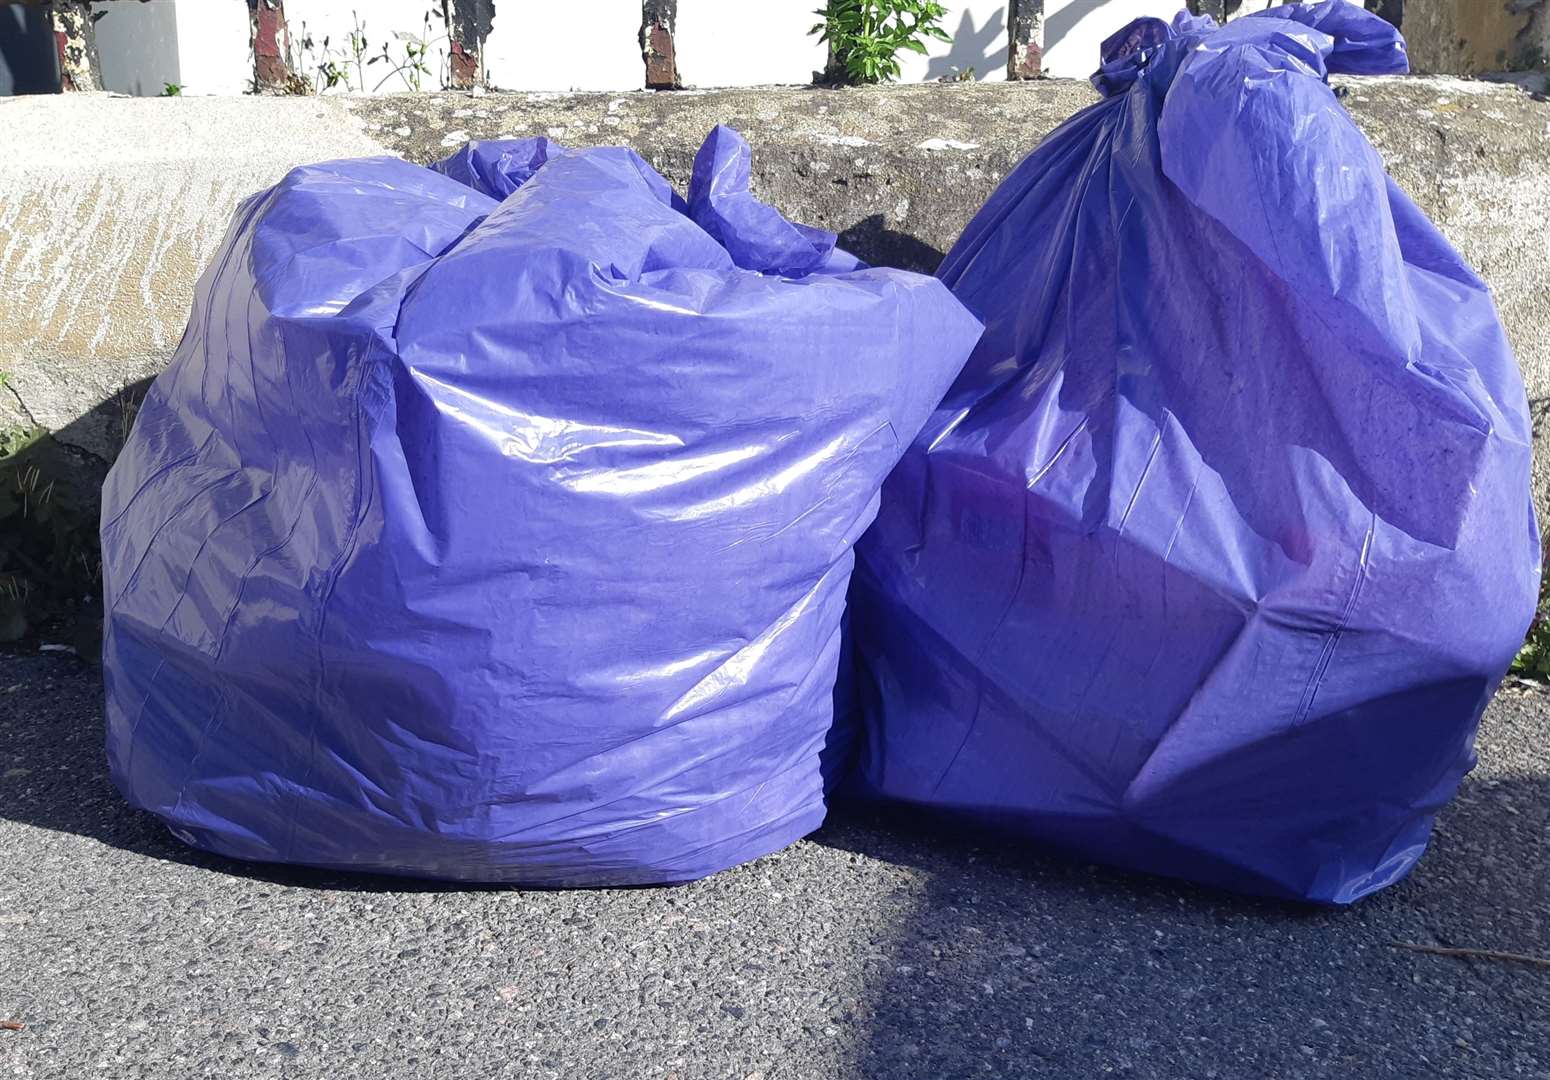 Bin bags awaiting collection. Stock image